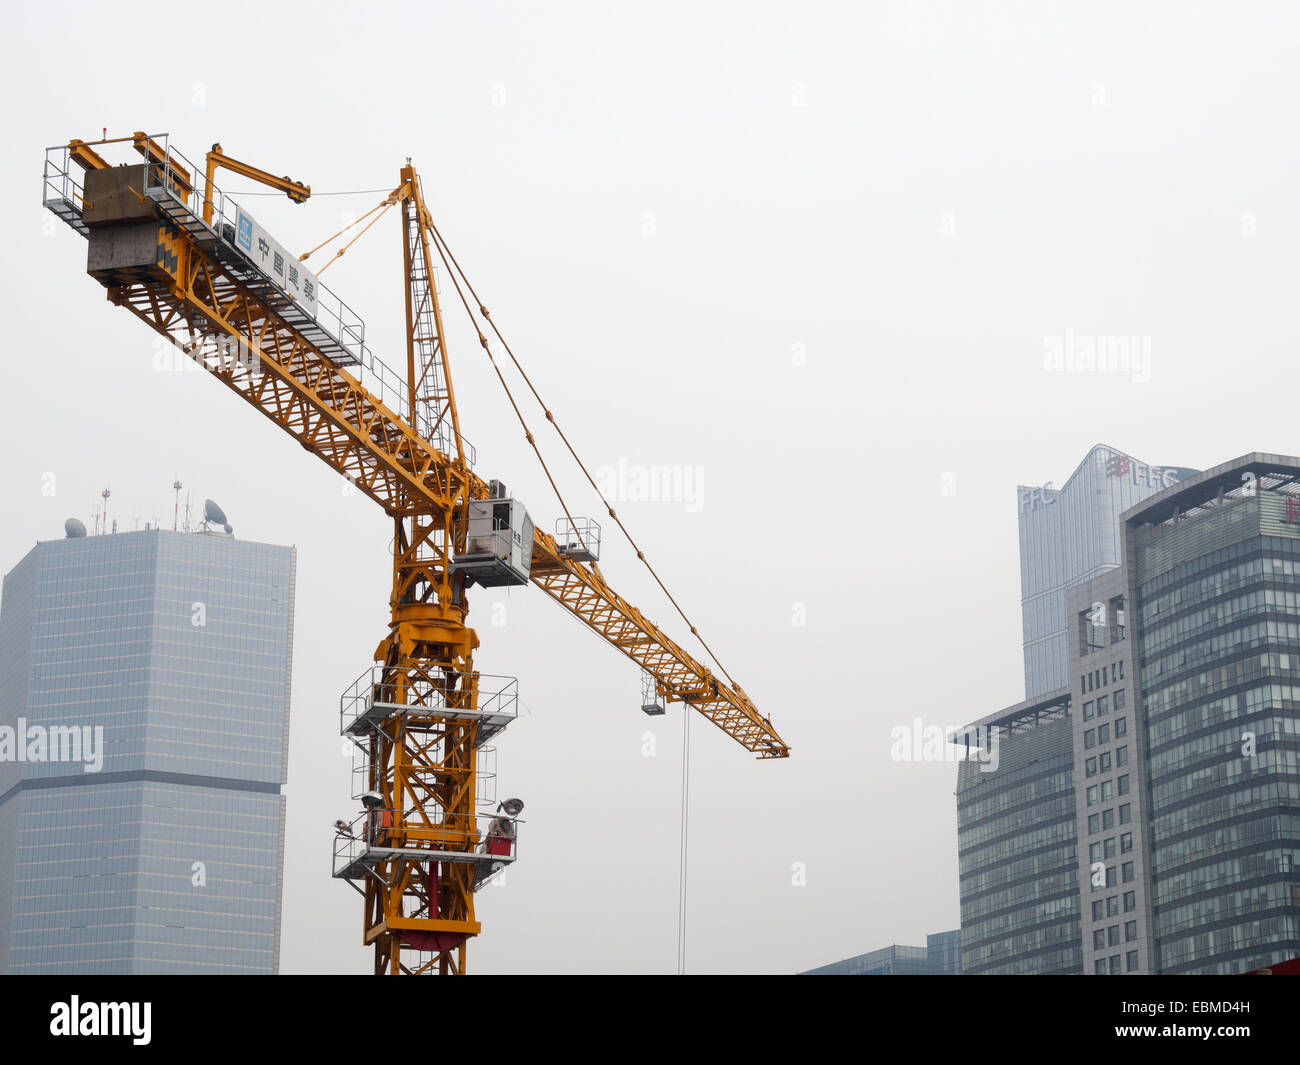 Construction crane amidst high-rise buildings in Beijing, China Stock Photo